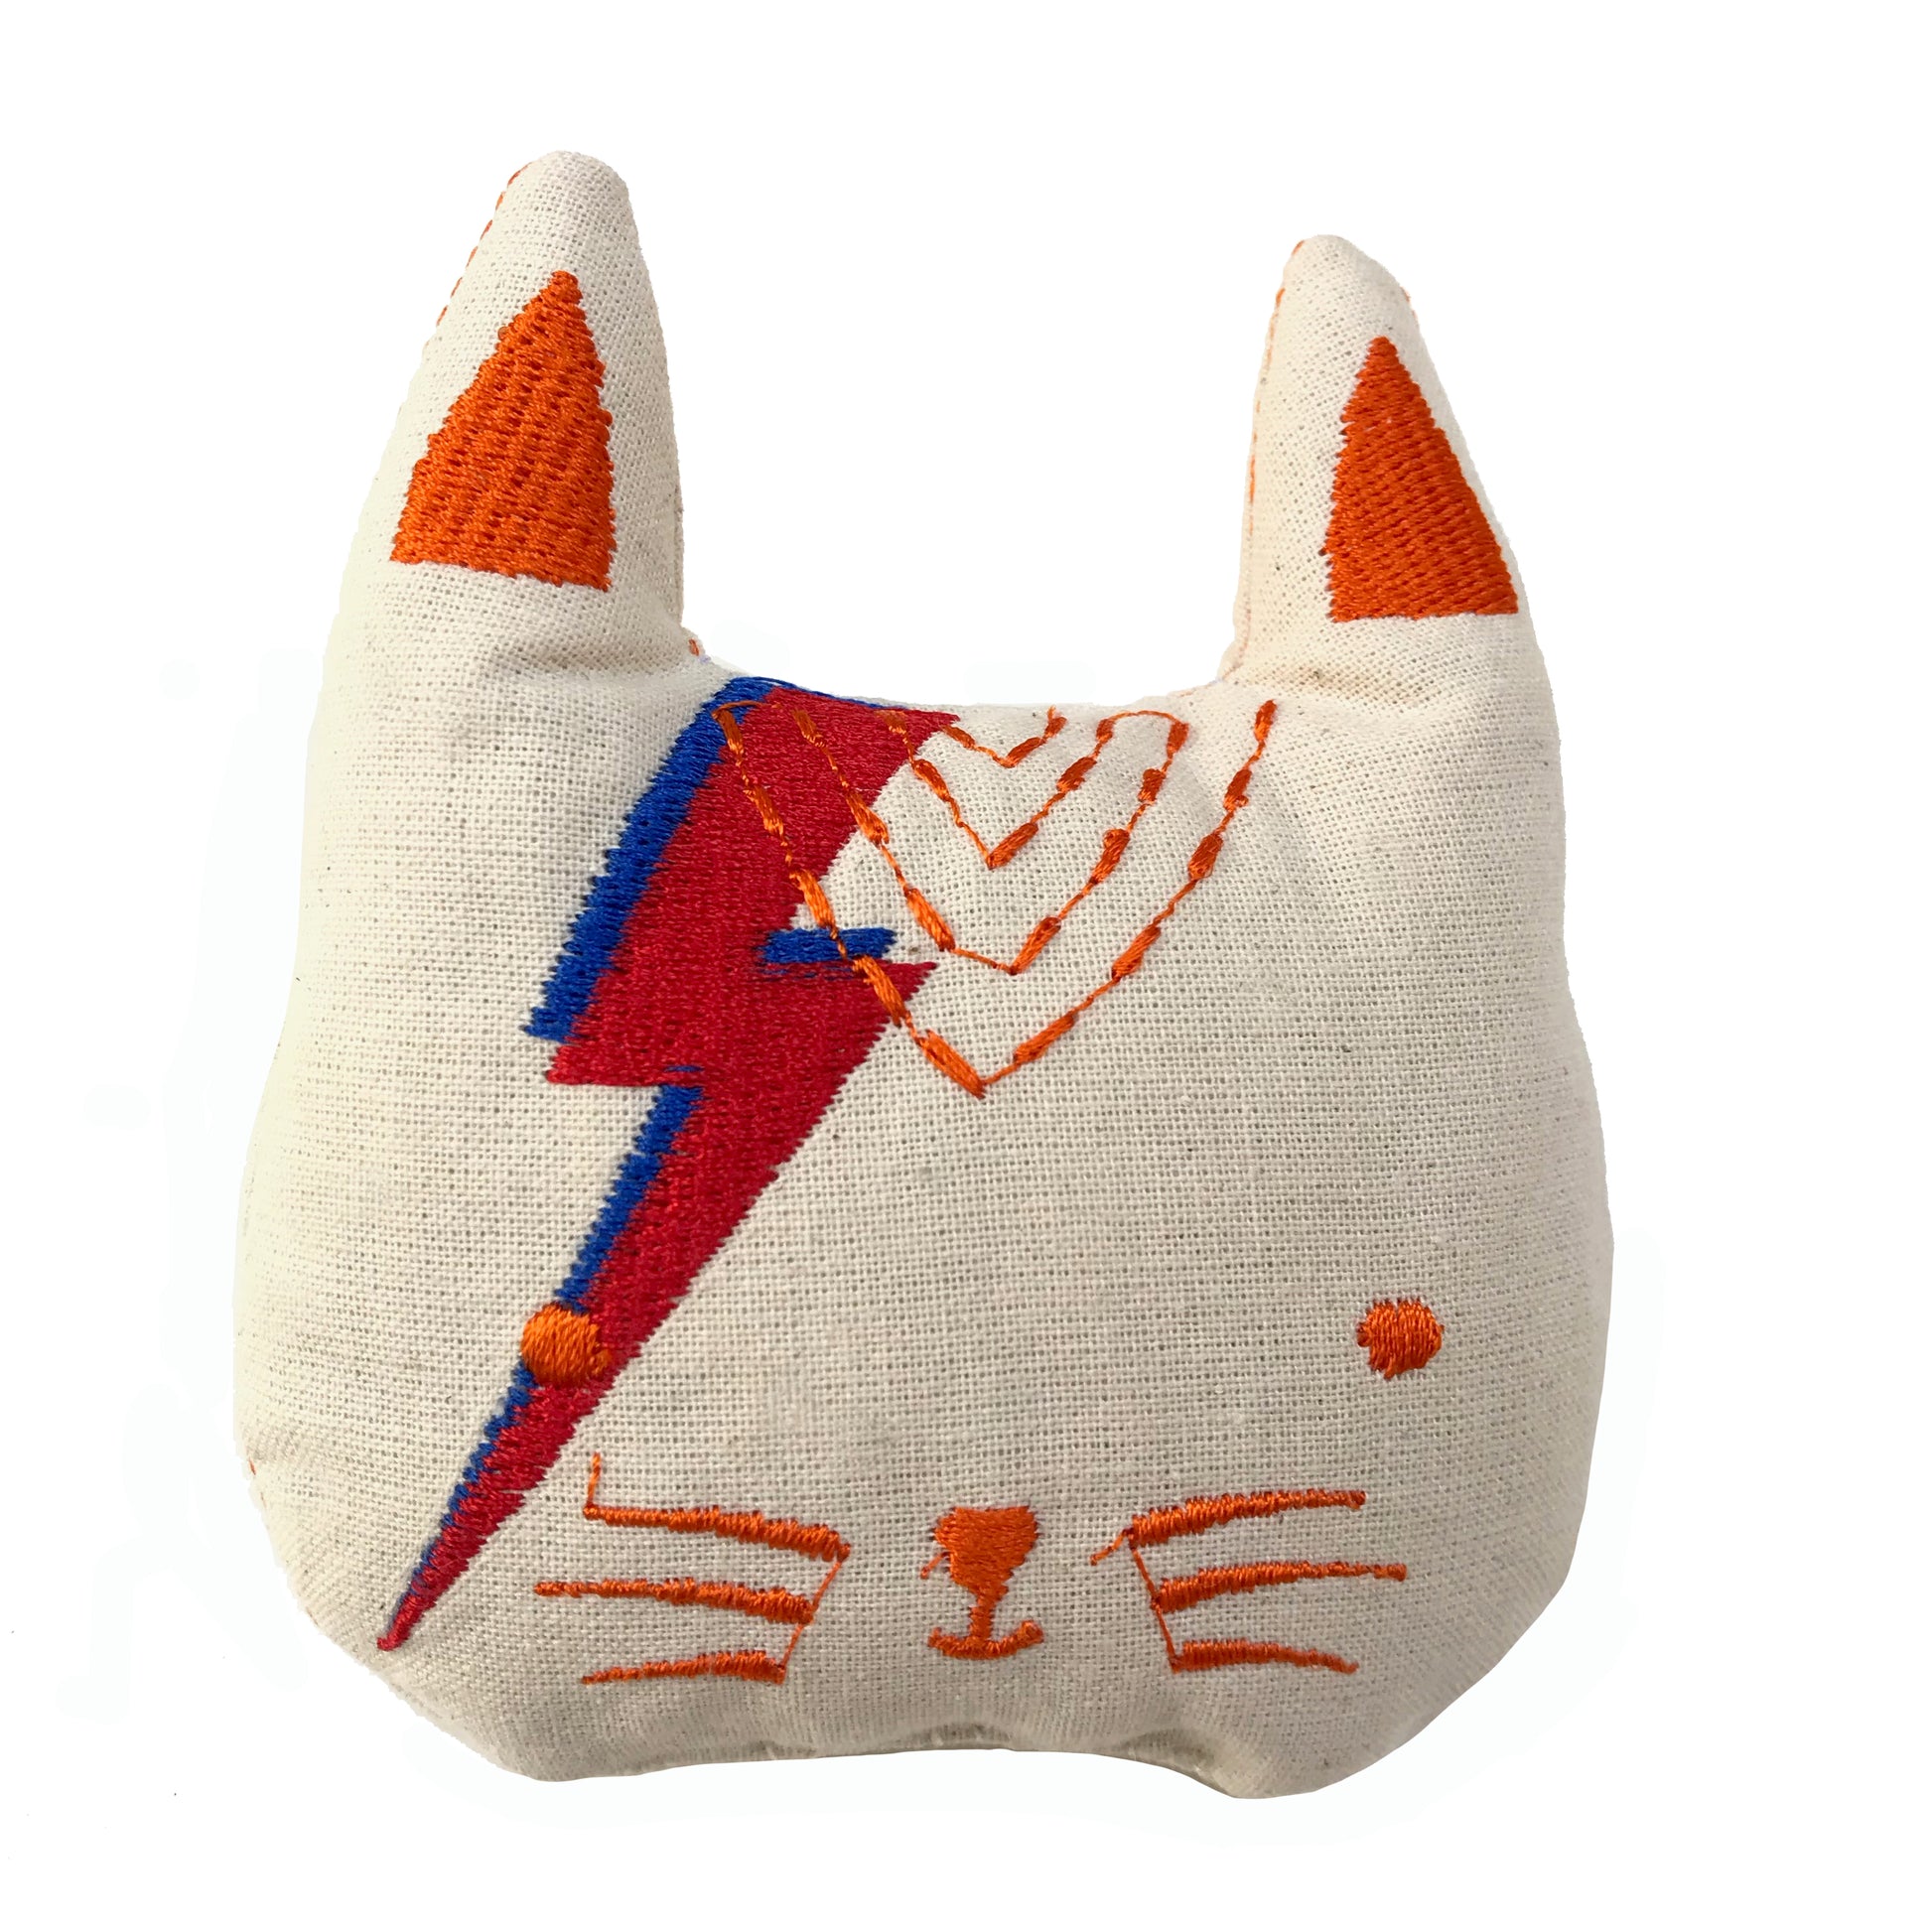 Freak Meowt Luxury Cat Toys, Gifts for Cats David Meowie, Handmade in Wales